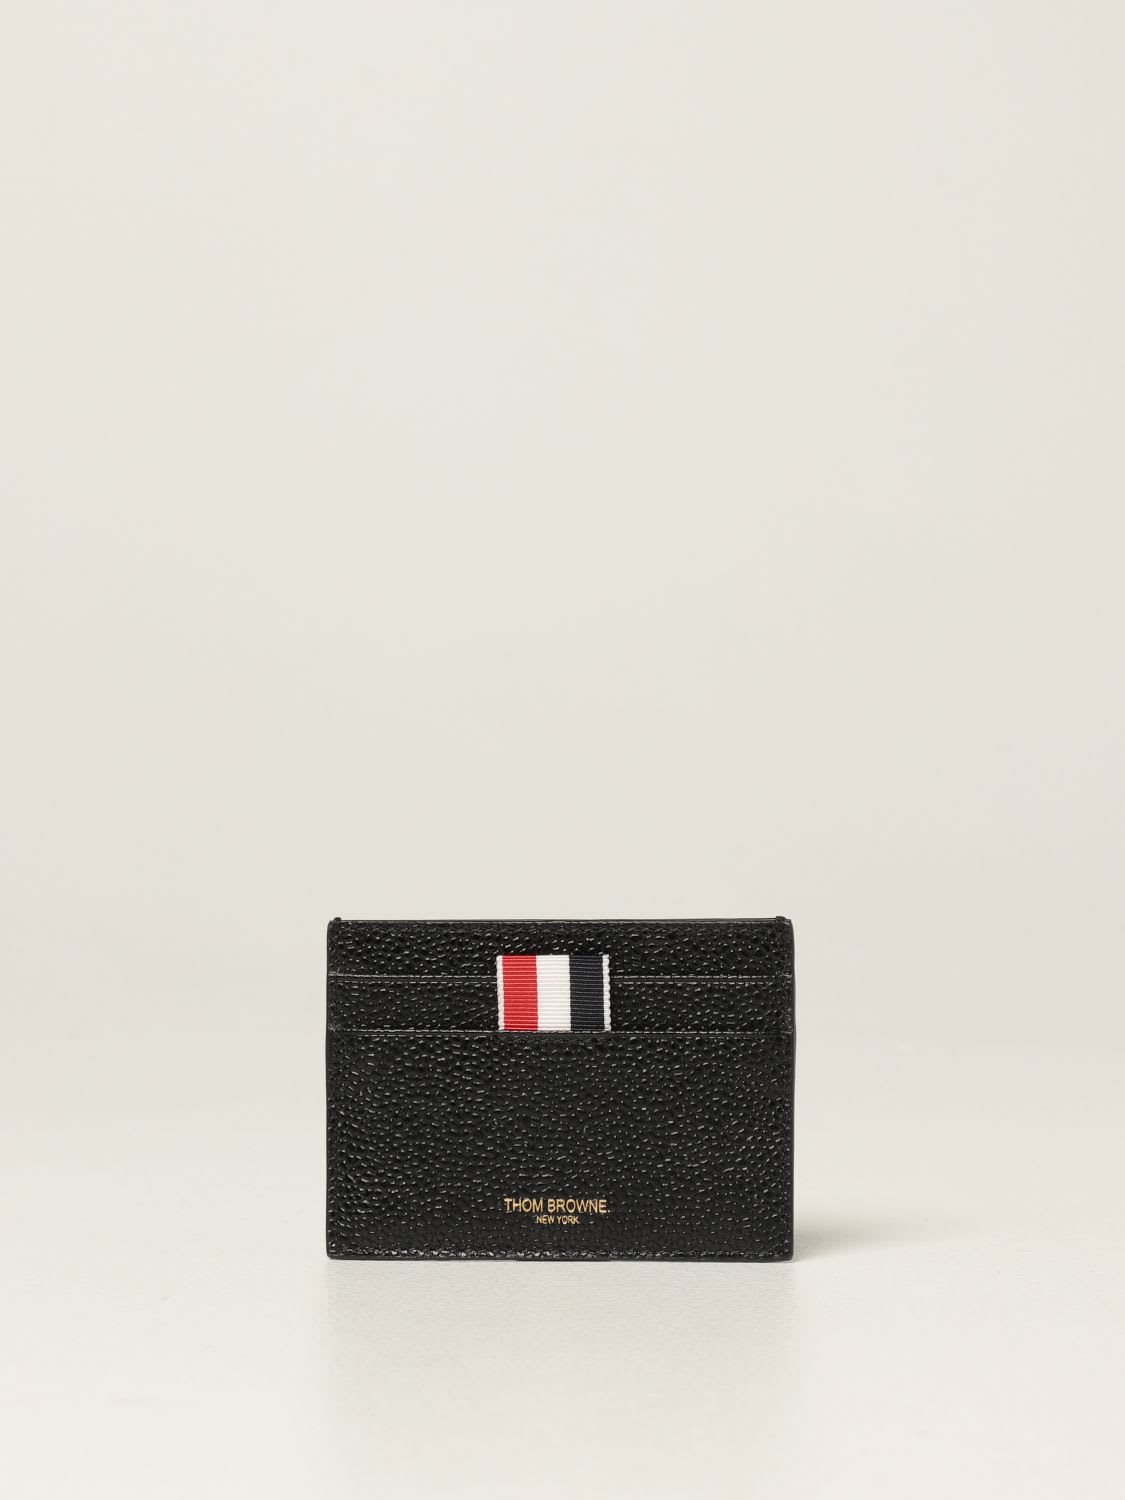 Thom Browne Wallet Thom Browne Credit Card Holder In Grained Leather